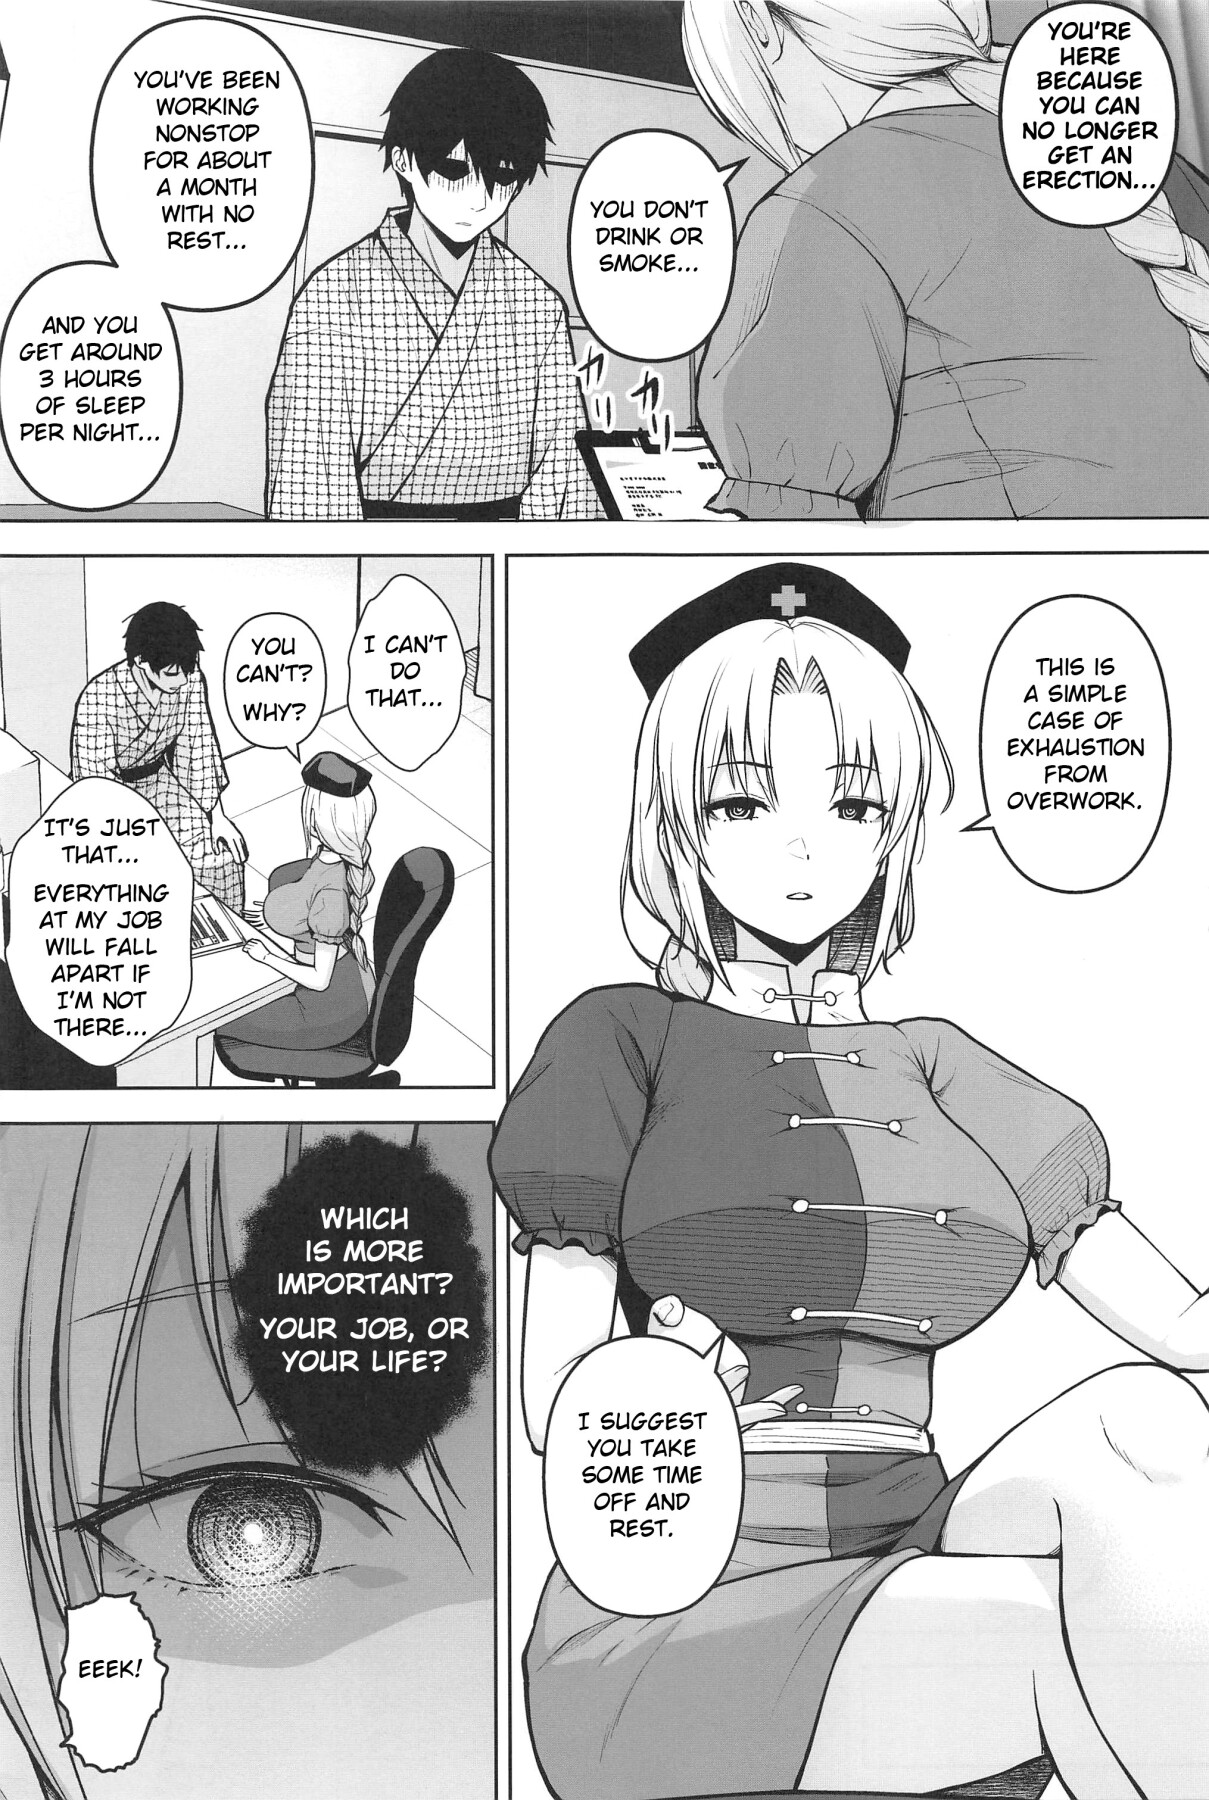 Hentai Manga Comic-The Story of Eirin's Boobs Getting Messed With and Becoming P Cups-Read-2